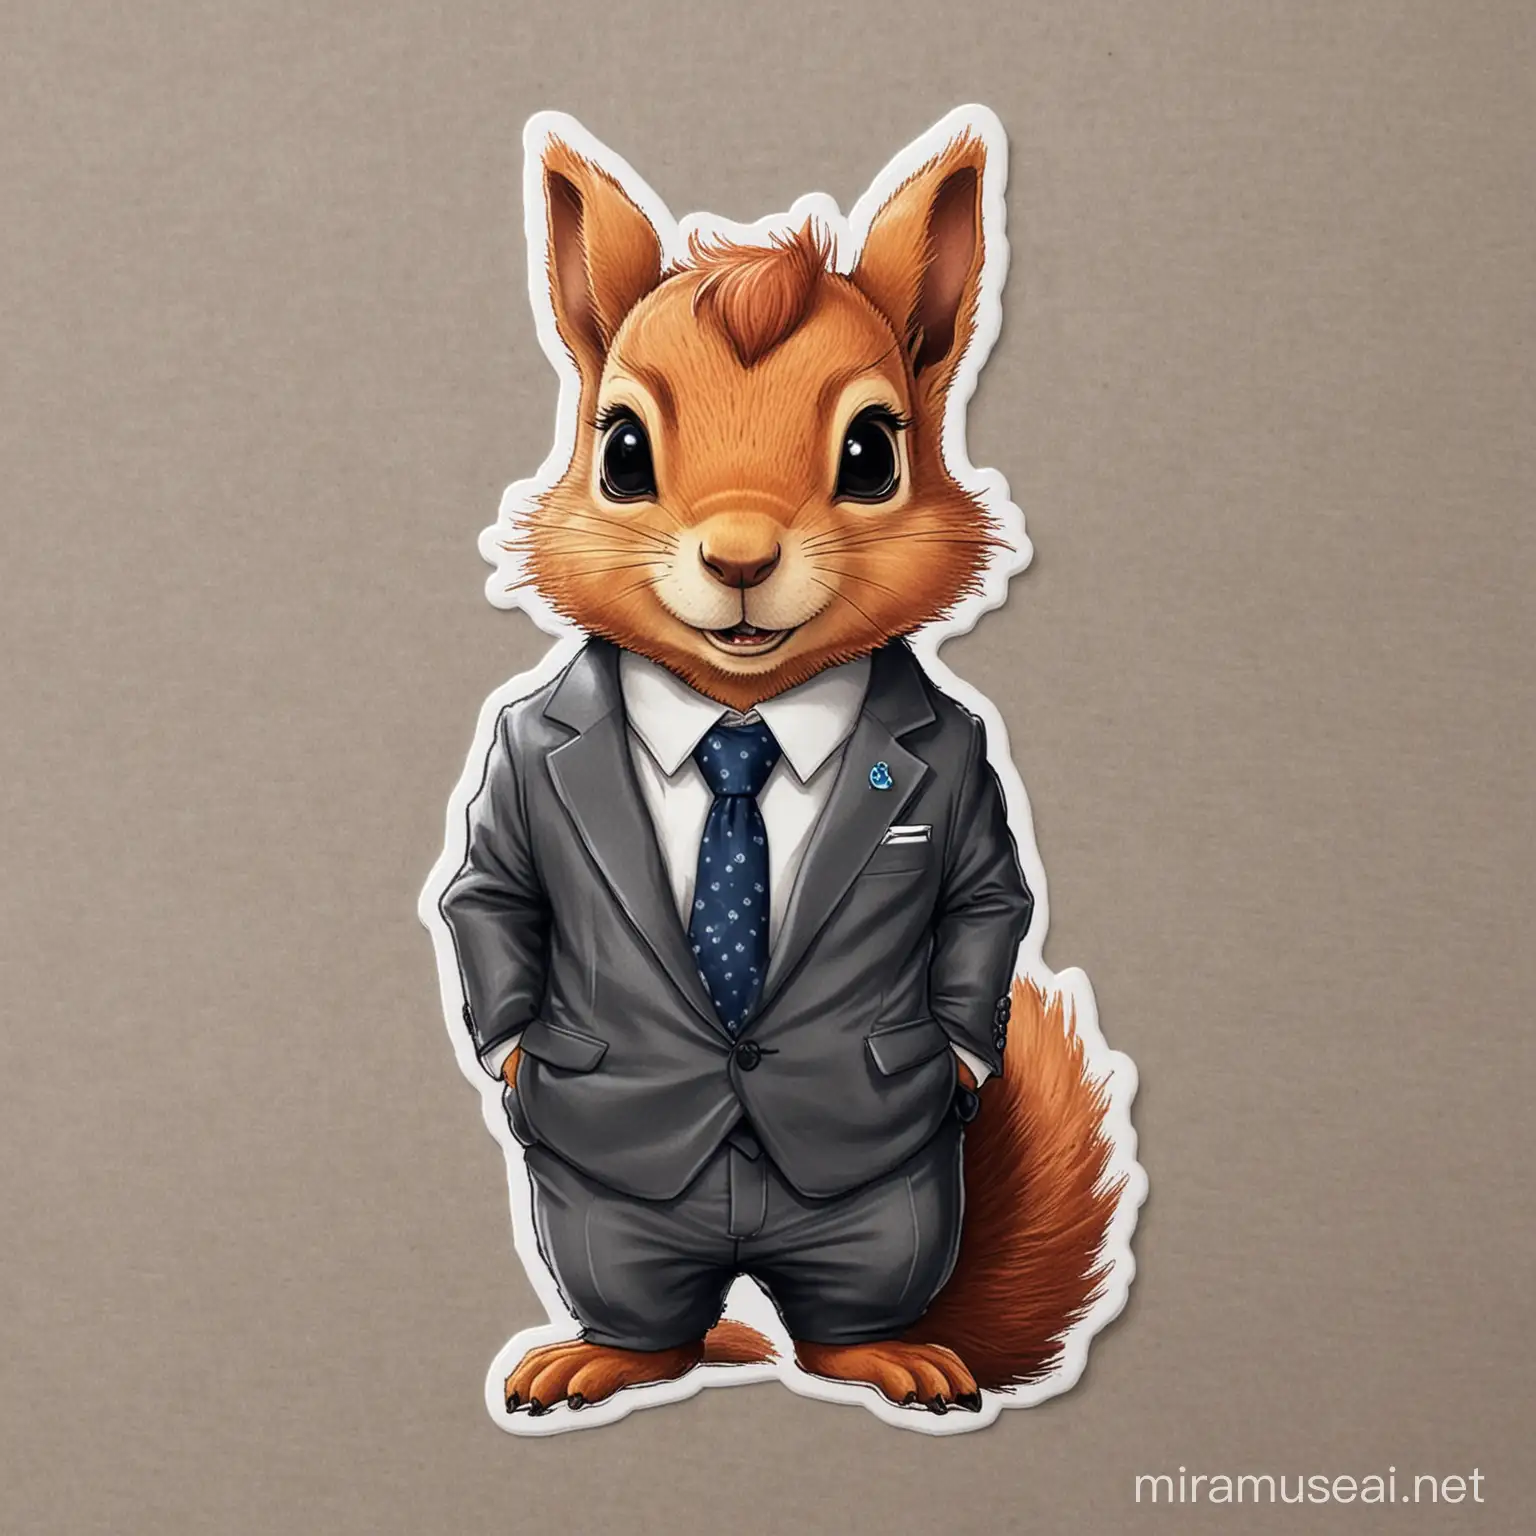 I want a sticker with squirrel wearing a suit and tie.  The image should be in the sticker format